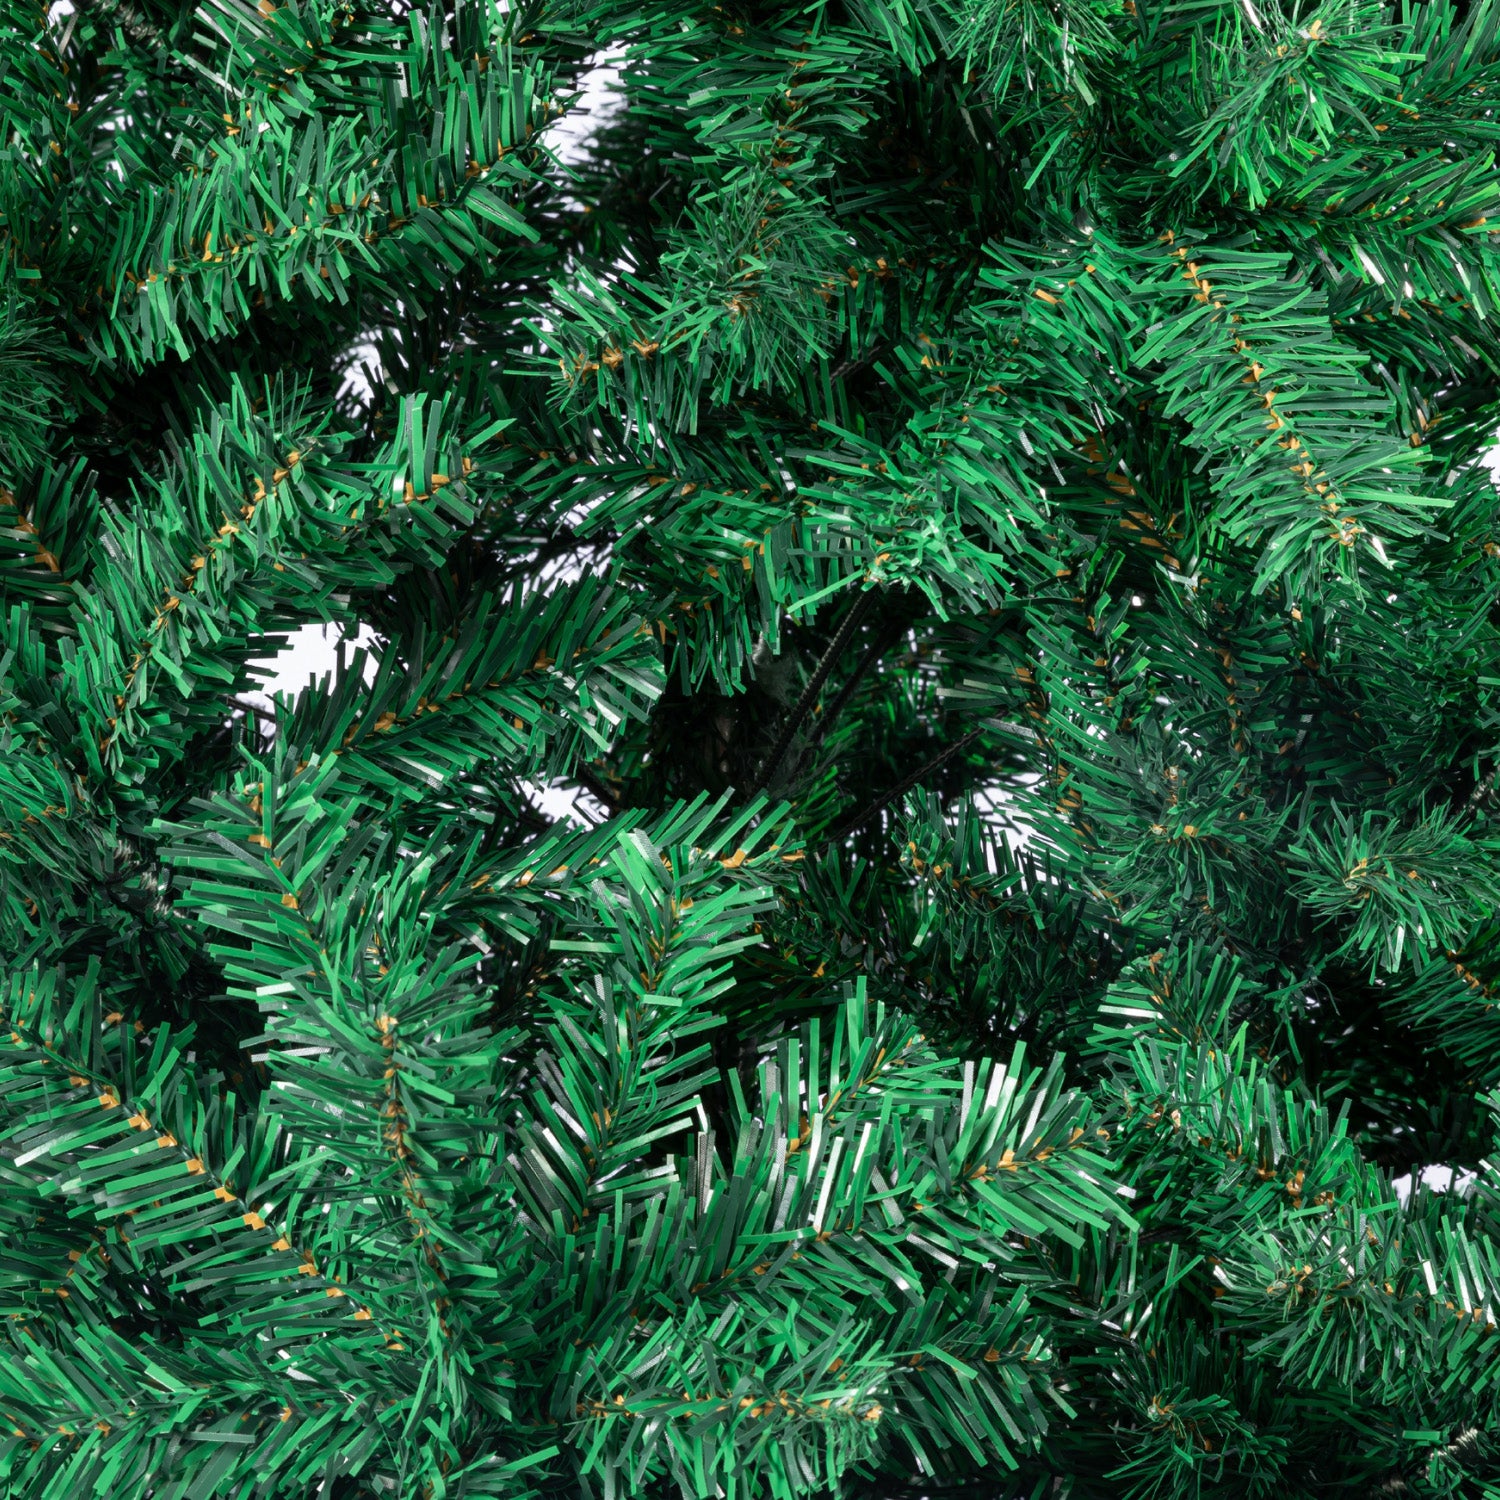 Christabelle Green Christmas Tree 2.4m Xmas Decor Decorations - 1500 Tips-Occasions &gt; Christmas-PEROZ Accessories